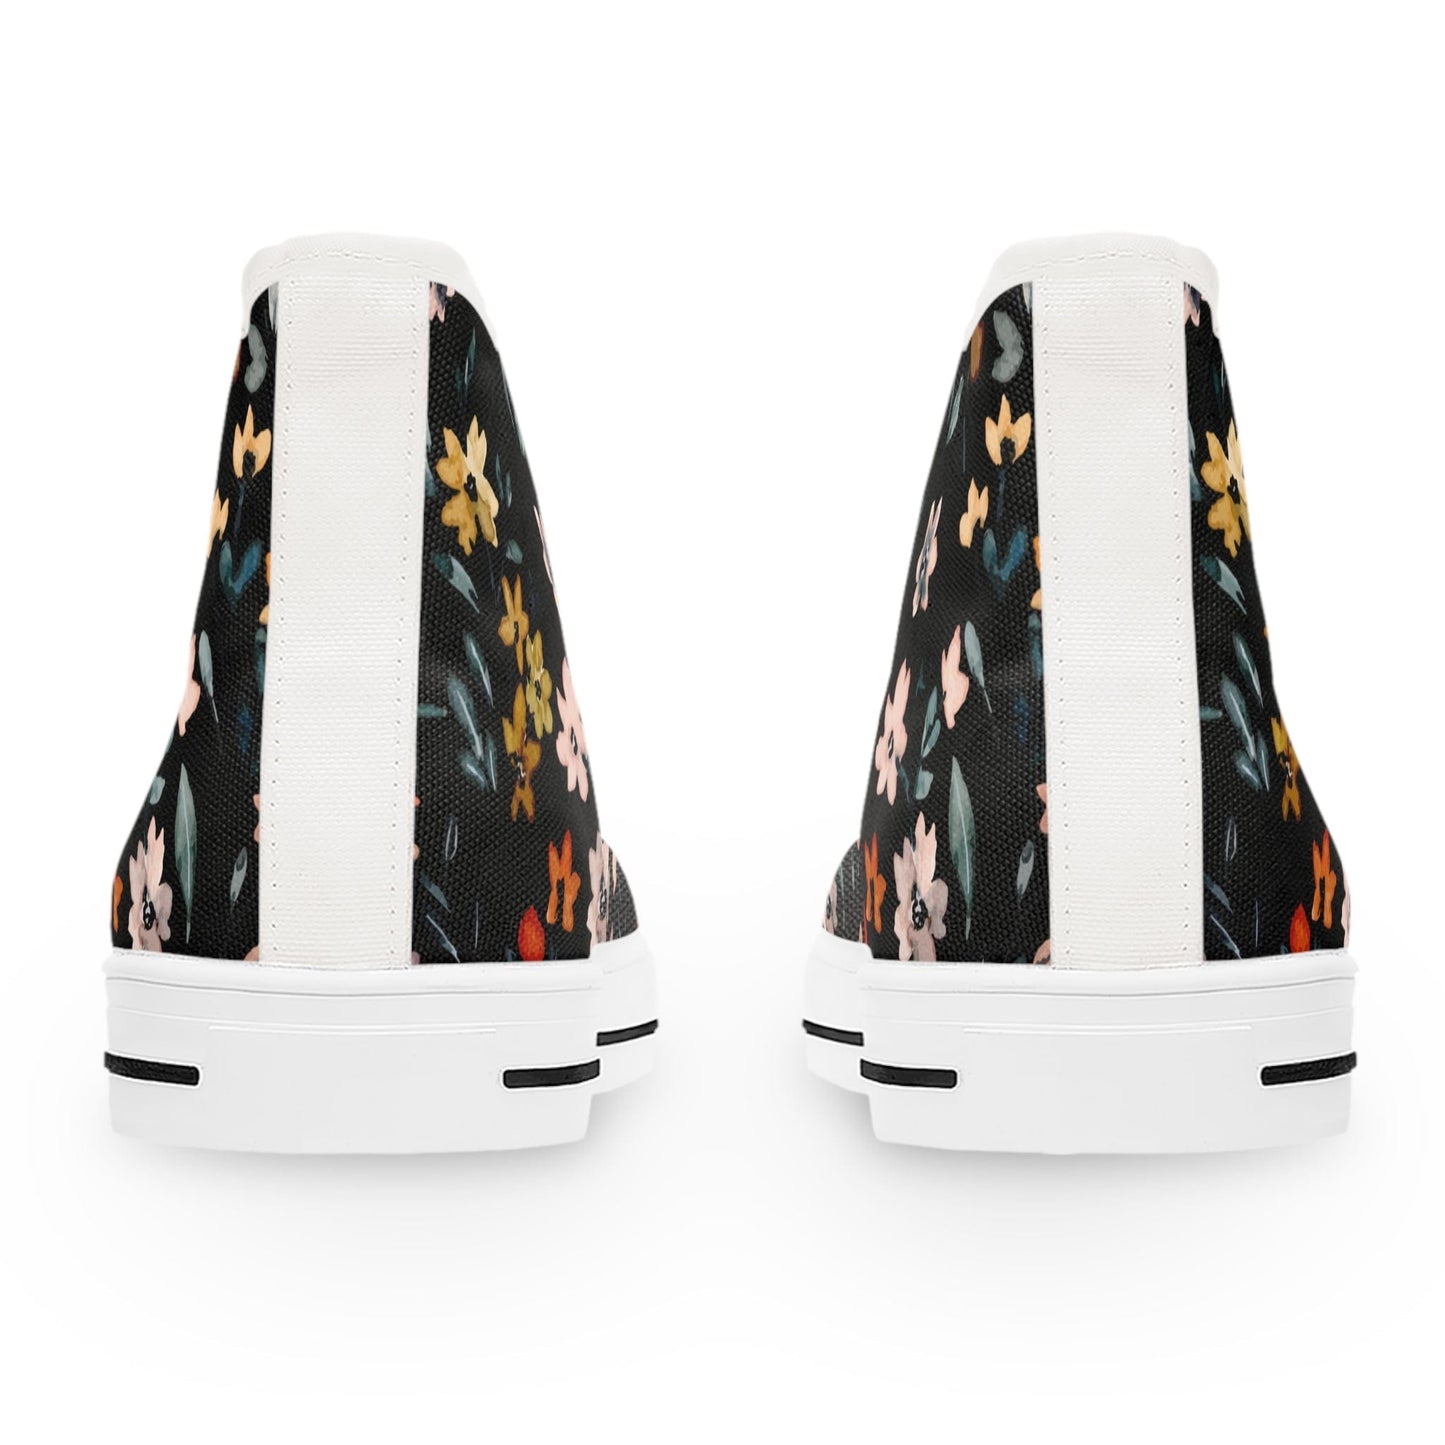 Printify Shoes Do Not Worry Floral Women's High Top Sneakers